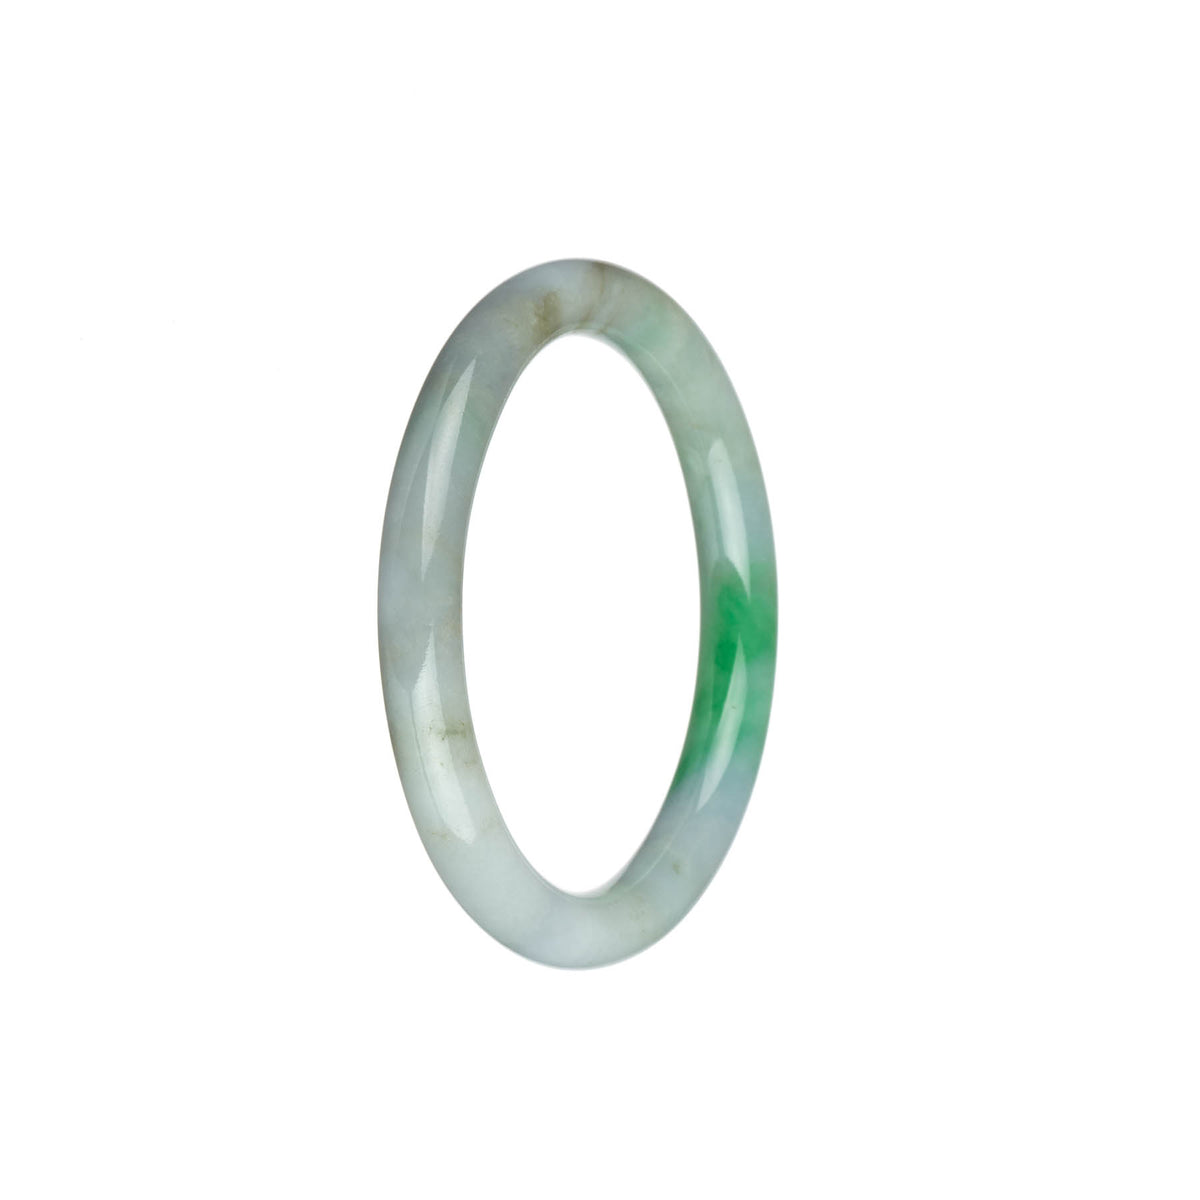 Genuine Grade A Faint Lavender and Pale Green with Emerald Green Traditional Jade Bangle Bracelet - 53mm Petite Round